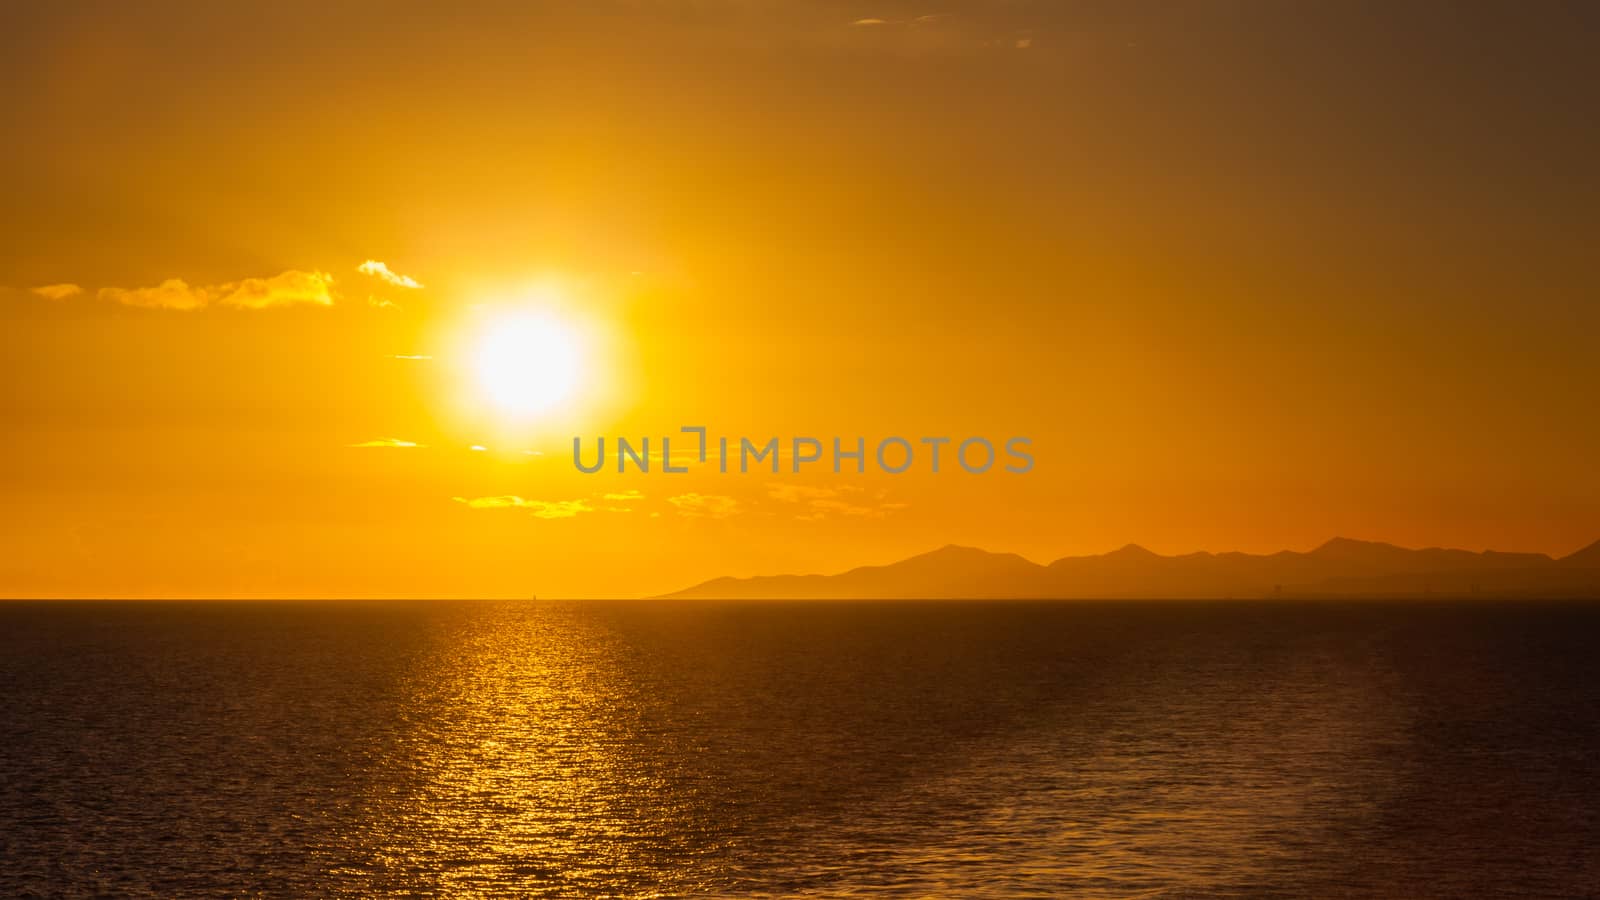 Sunset over the coastline of the Spanish Canary island of Lanzarote.  A yacht can be seen passing under the sun on the horizon.